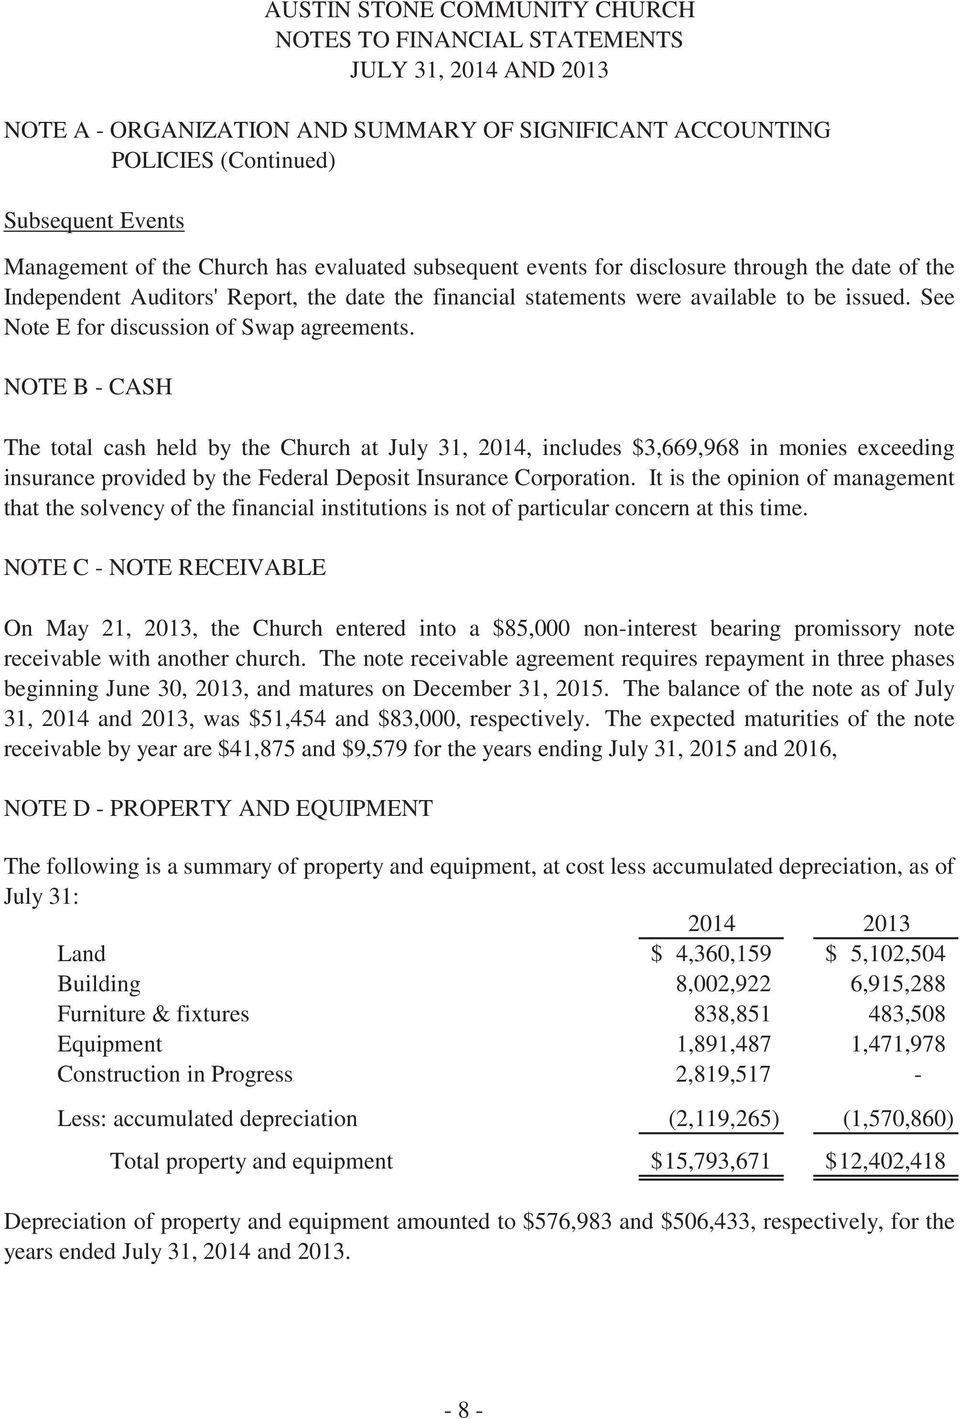 NOTE B - CASH The total cash held by the Church at July 31, 2014, includes $3,669,968 in monies exceeding insurance provided by the Federal Deposit Insurance Corporation.